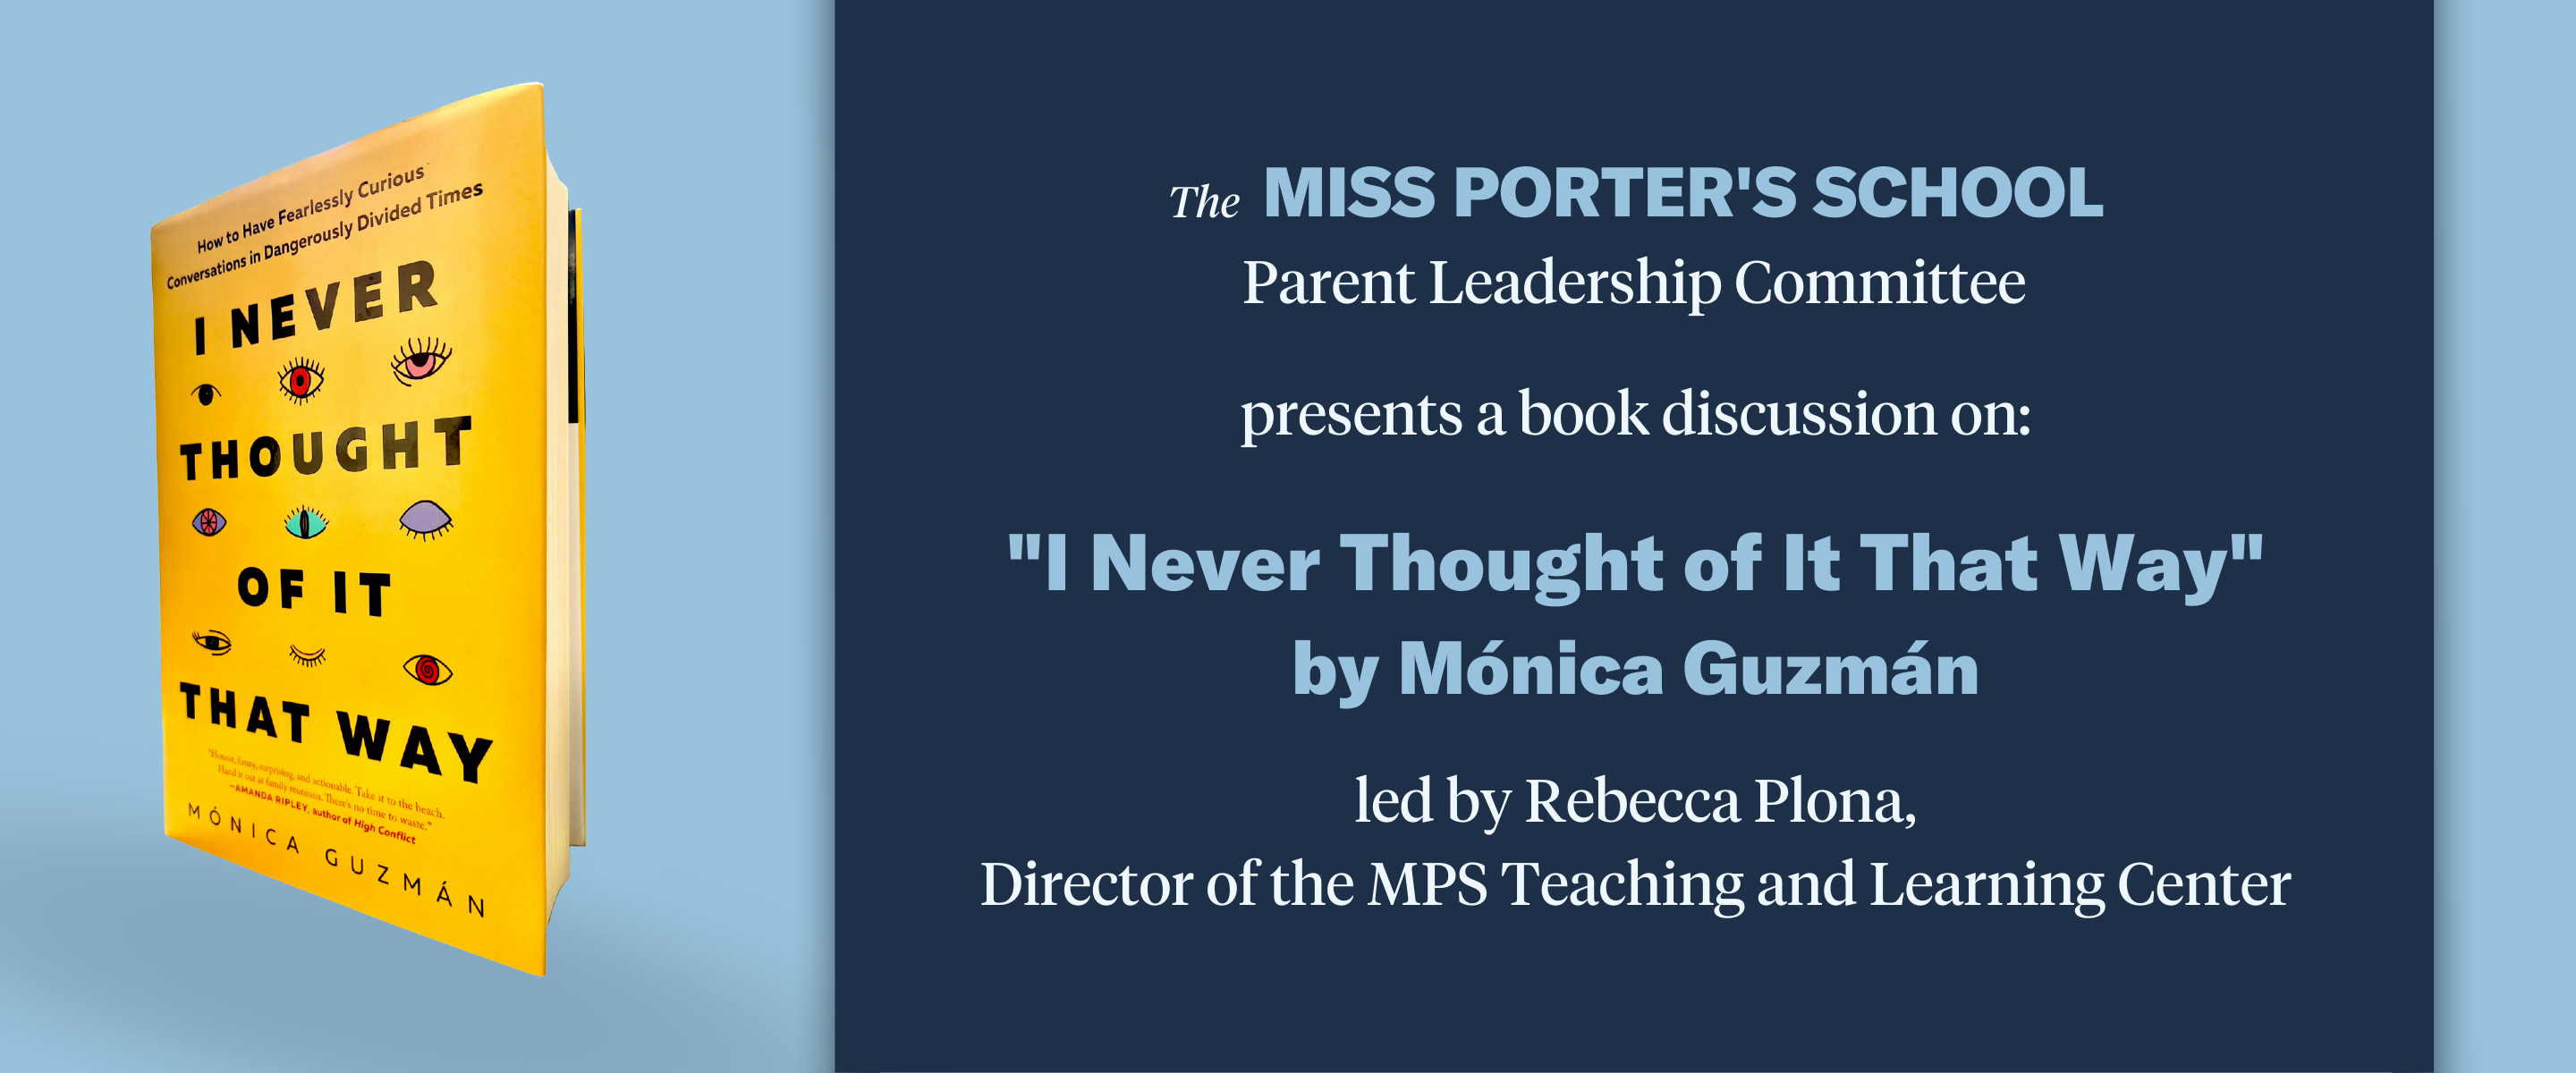 The Miss Porter's School Parent Leadership Committee presents a book discussion on "I Never Thought of It That Way" By Monica Guzman